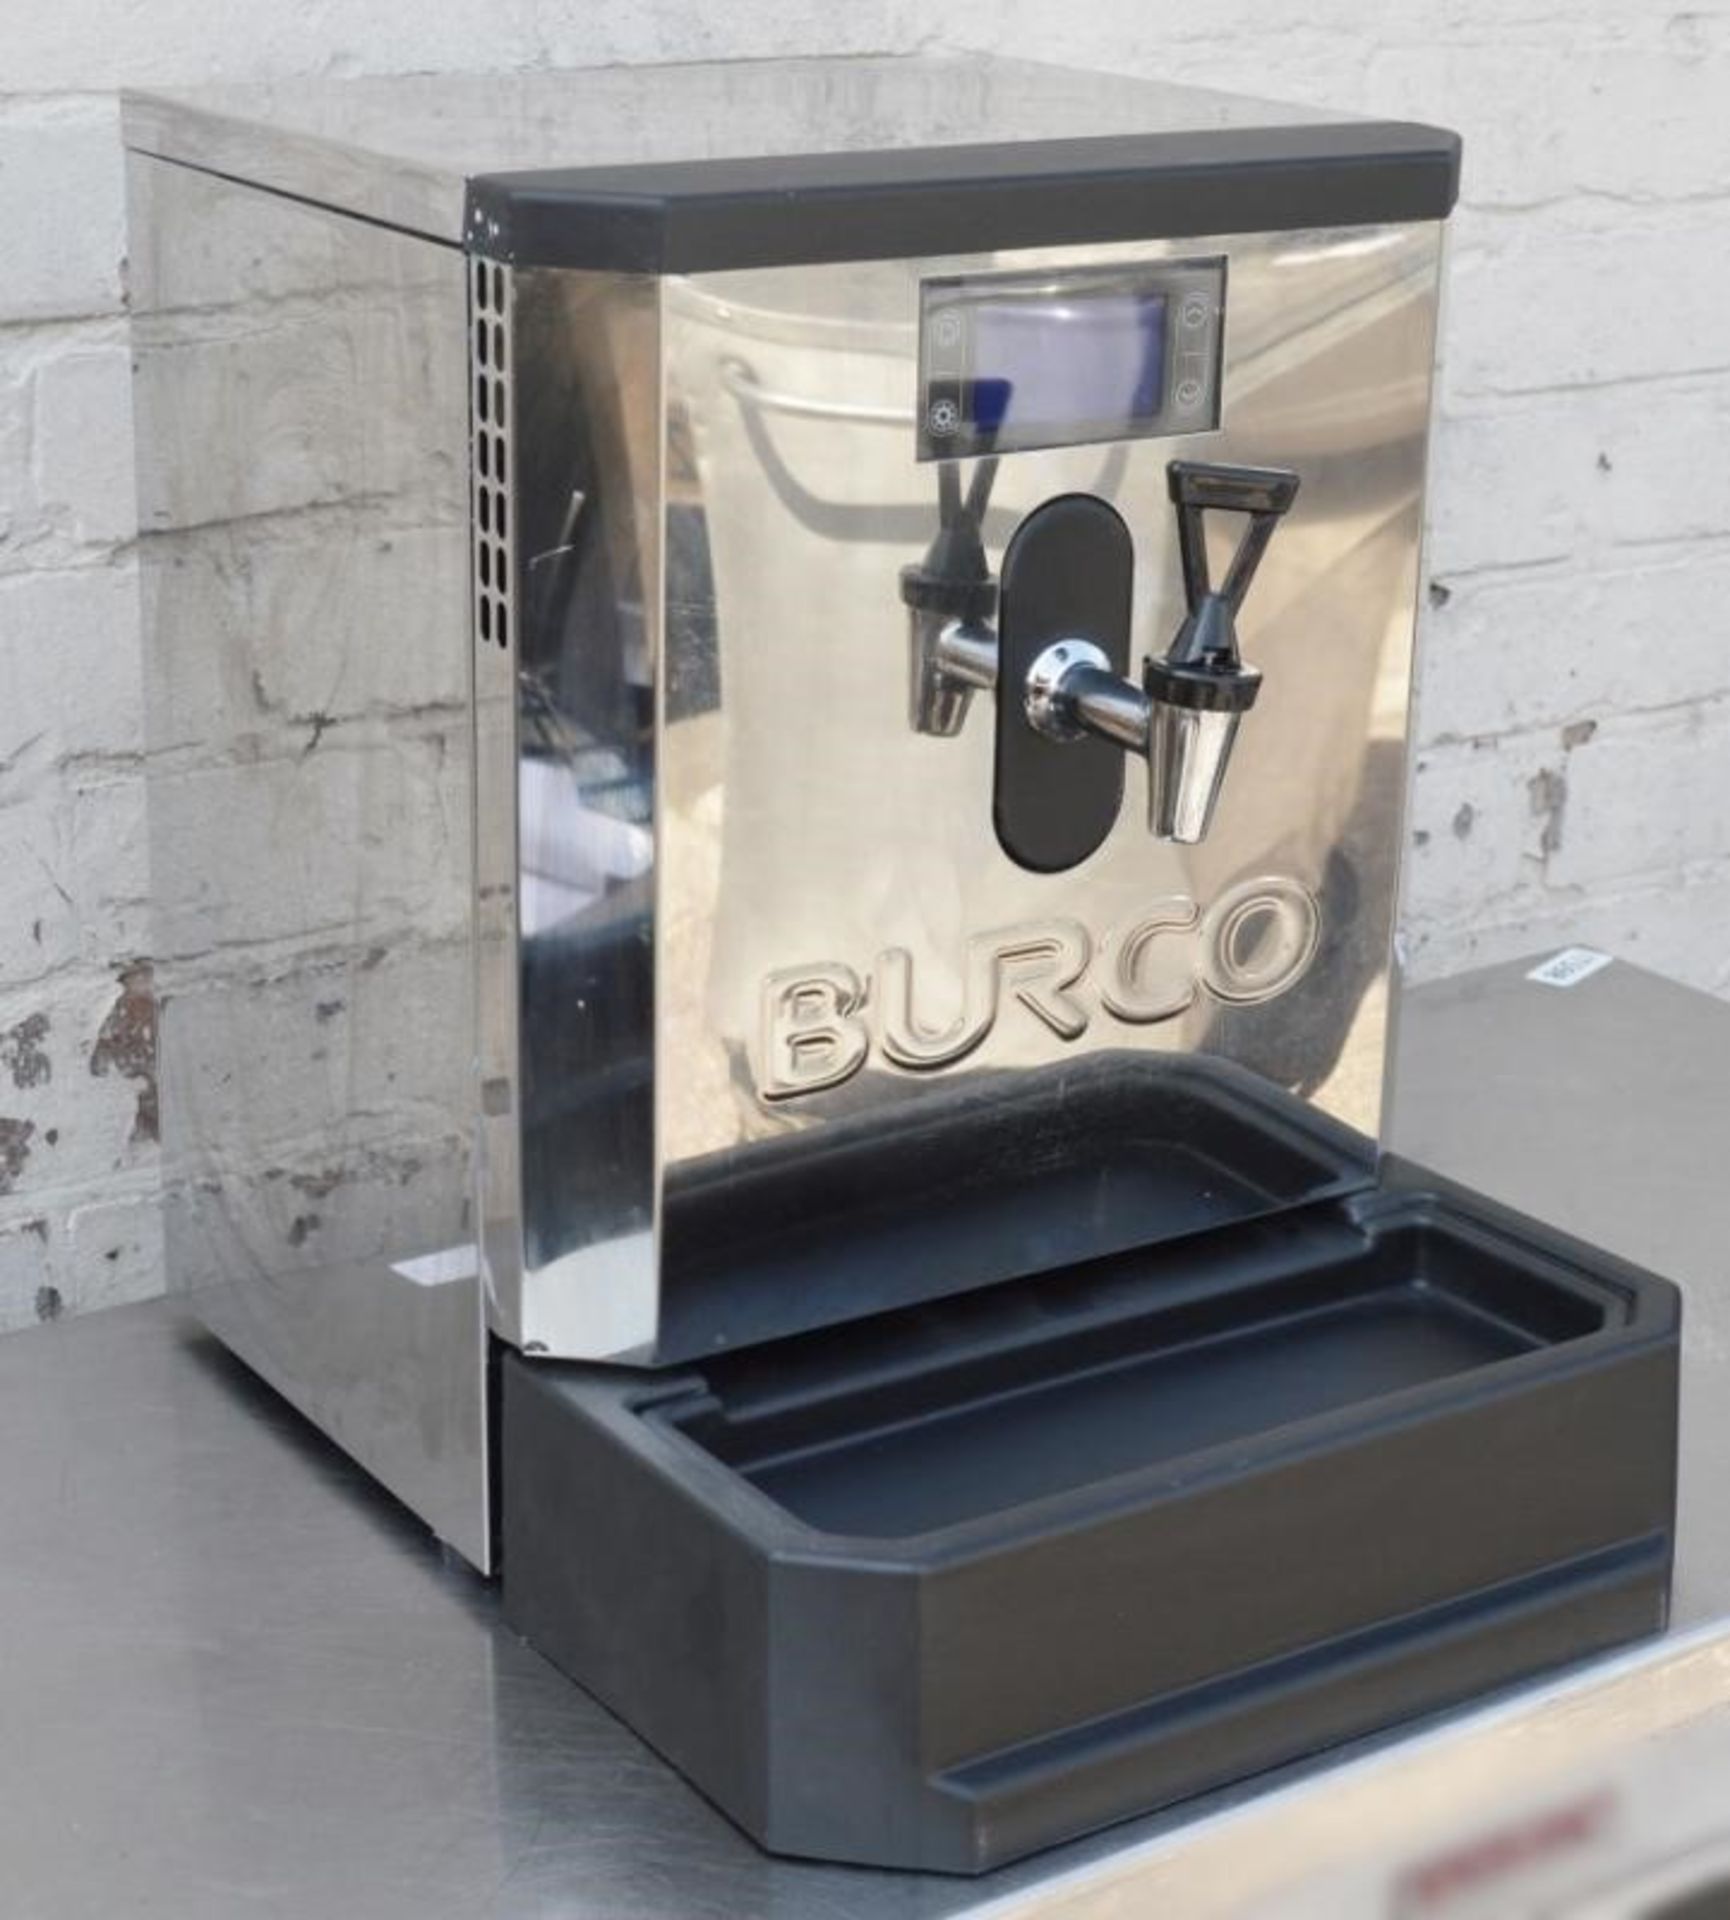 1 x BURCO Countertop Autofil Water Boiler With Filtration - 5 Litre Capacity - Stainless Steel Finis